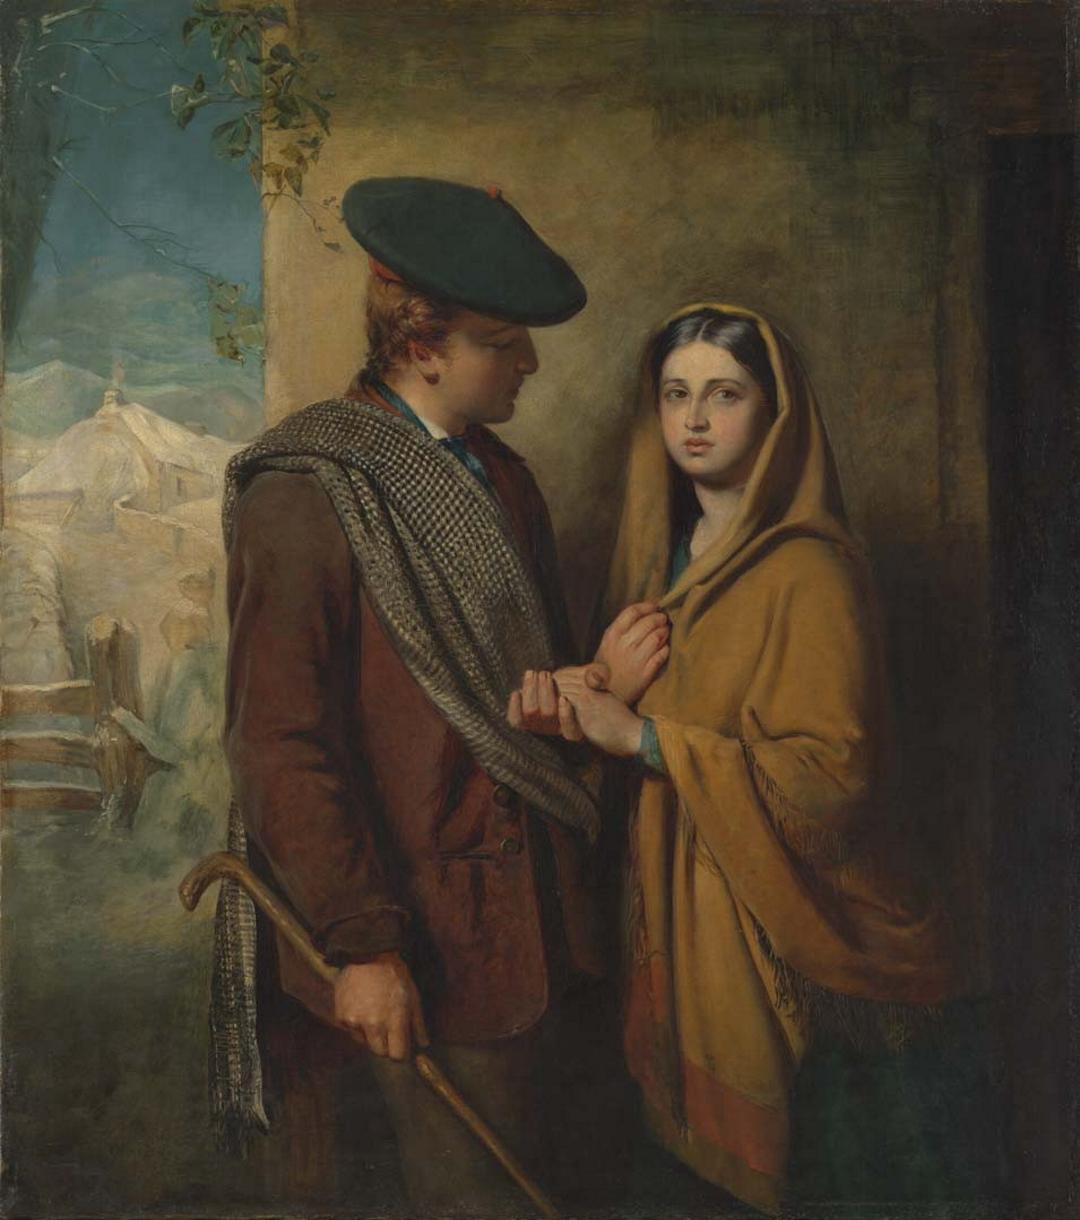 An oil painting of young Scottish lovers holding hands by a doorway, the man looking at the woman who faces towards the viewer while clutching her shawl.